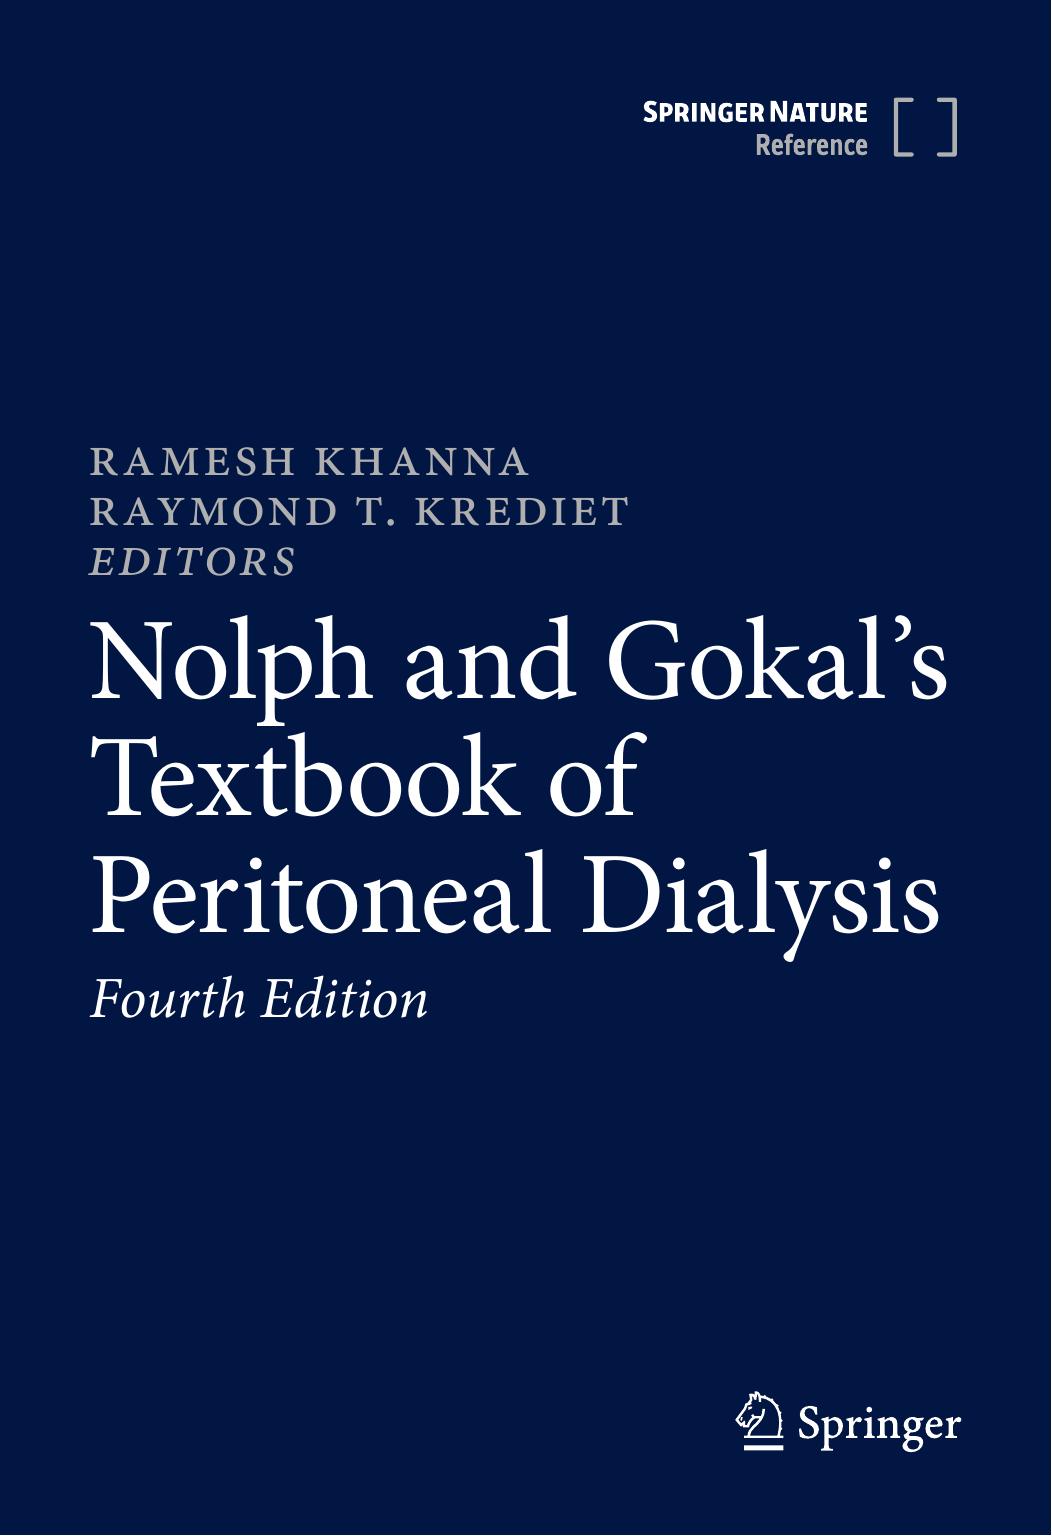 Nolph and Gokal's Textbook of Peritoneal Dialysis by Ramesh Khanna Raymond T. Krediet